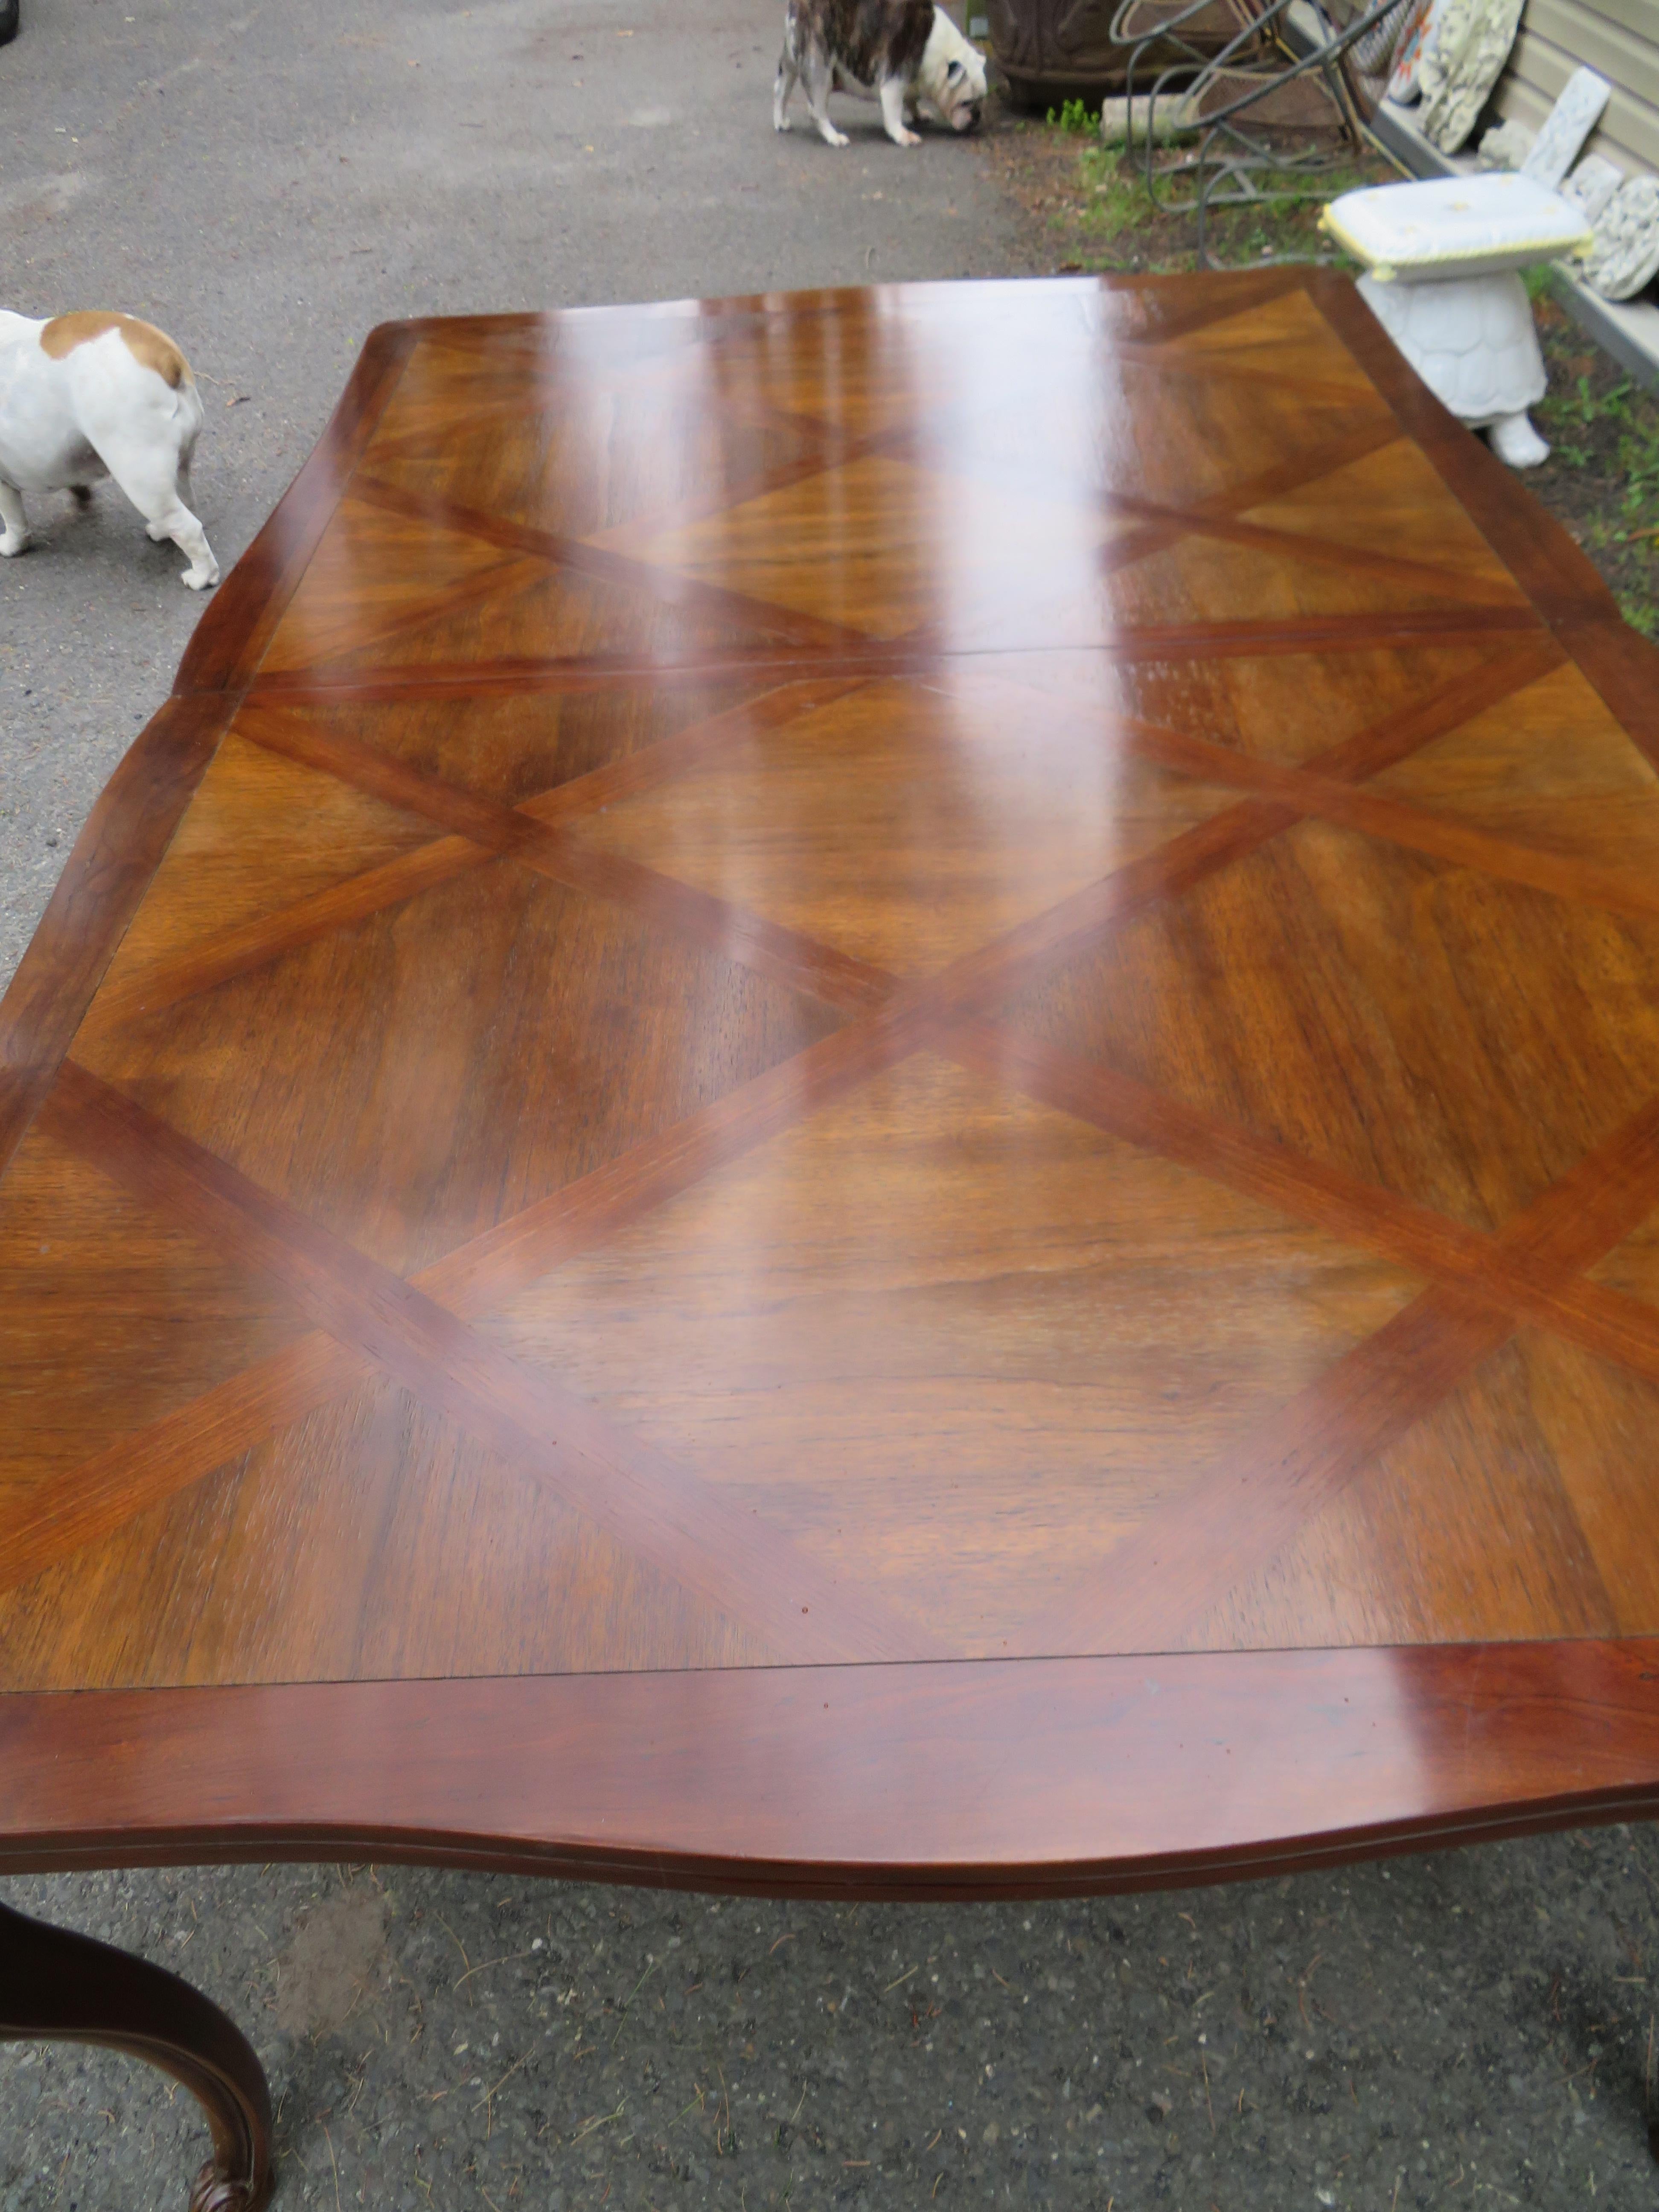 Stunning John Widdicomb Parquet Inlay Country French Provincial Dining Table In Good Condition For Sale In Pemberton, NJ